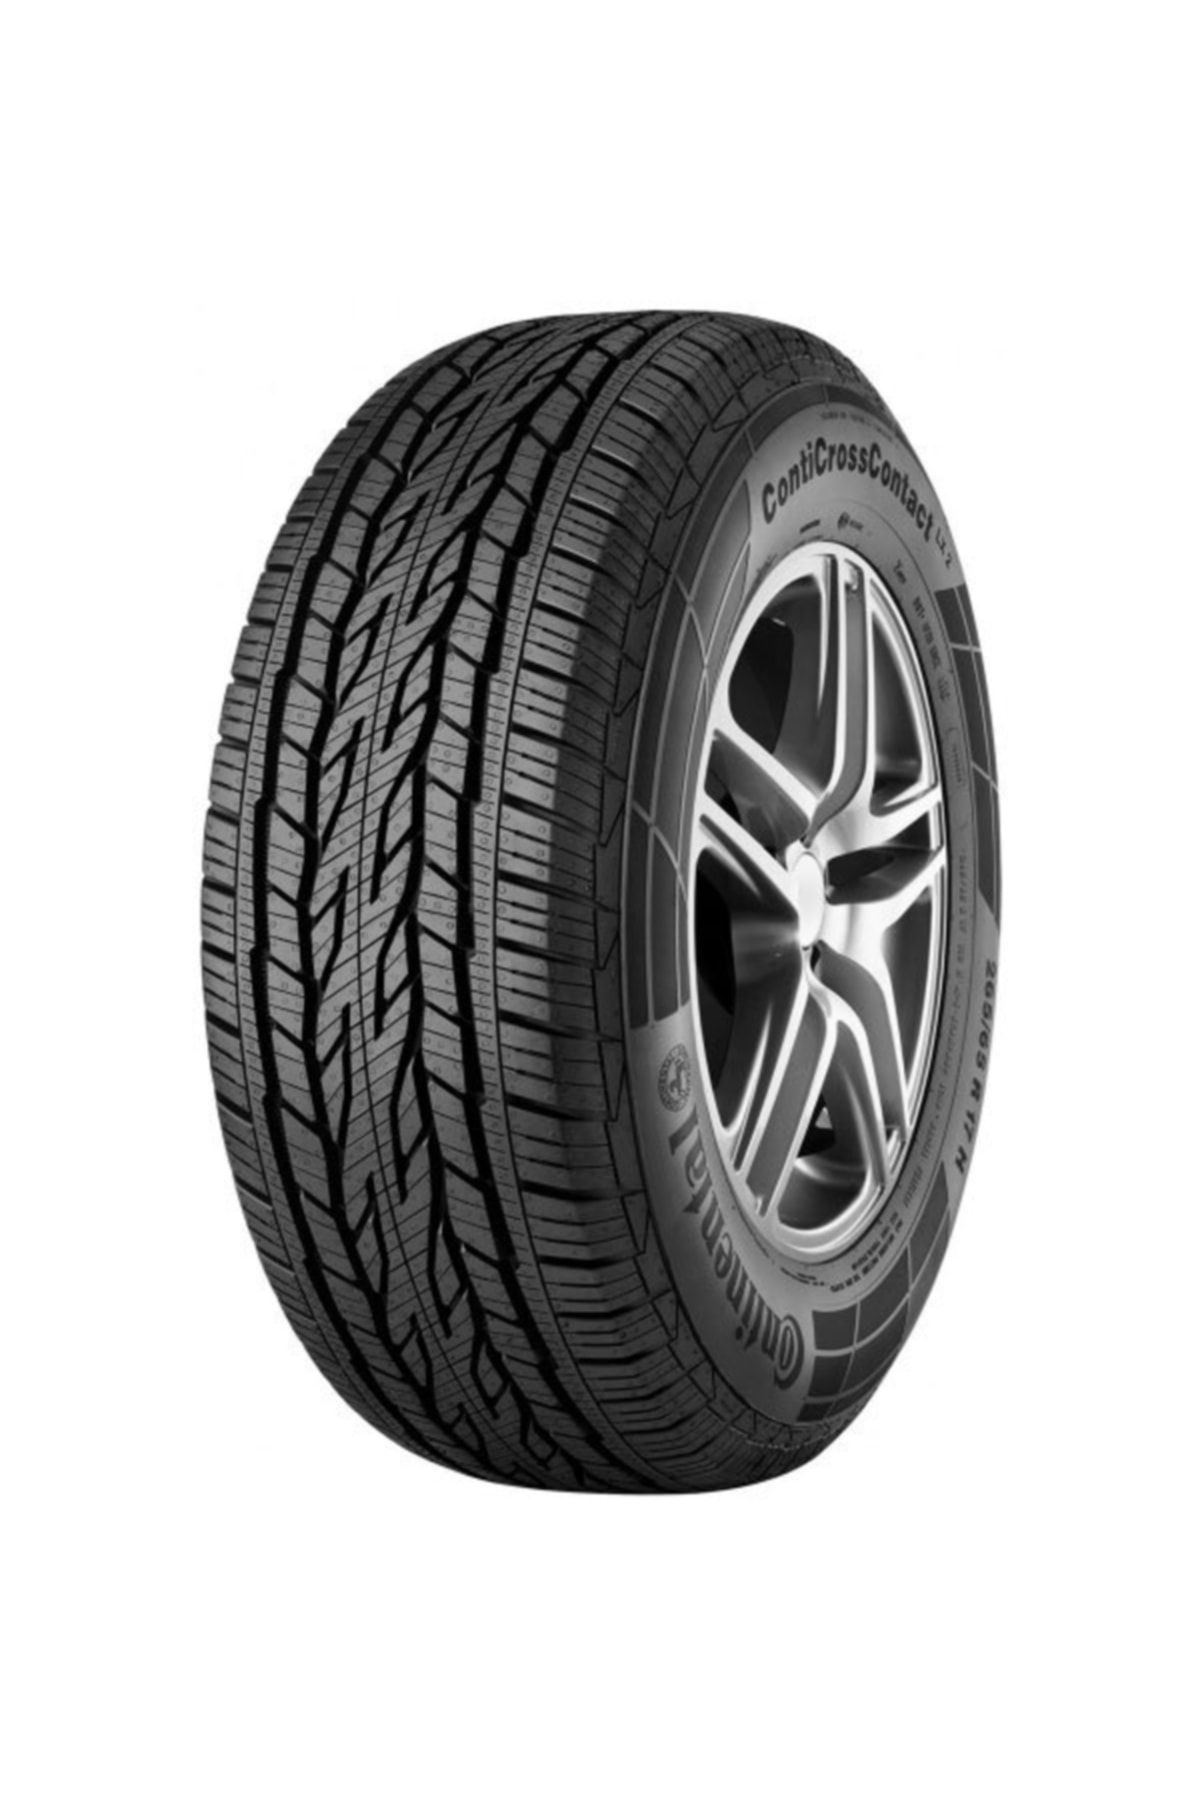 Continental 235/60r18 107v Xl Conticrosscontact Lx 2 (yaz) (2022)